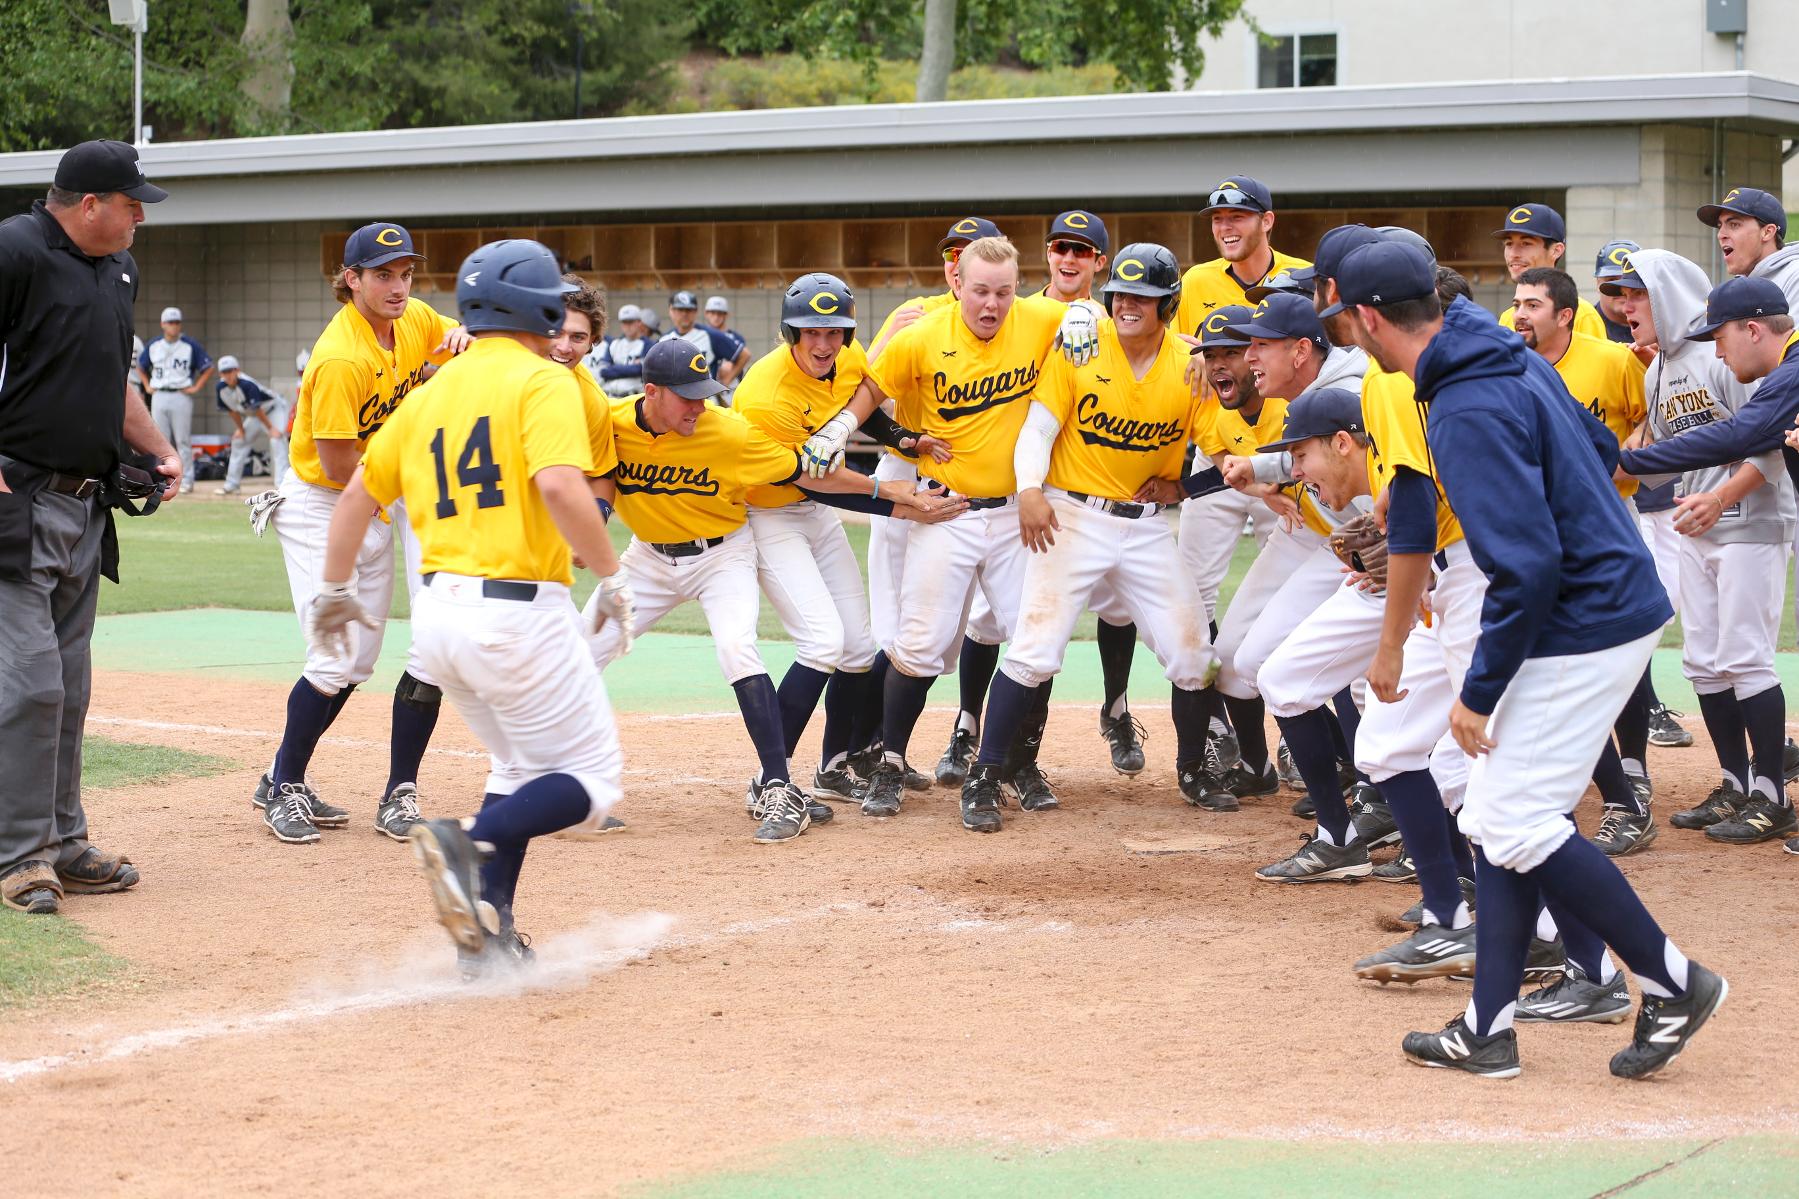 No. 2 Canyons Walks Off As 7-6 Winners; Win Streak at 10 Games